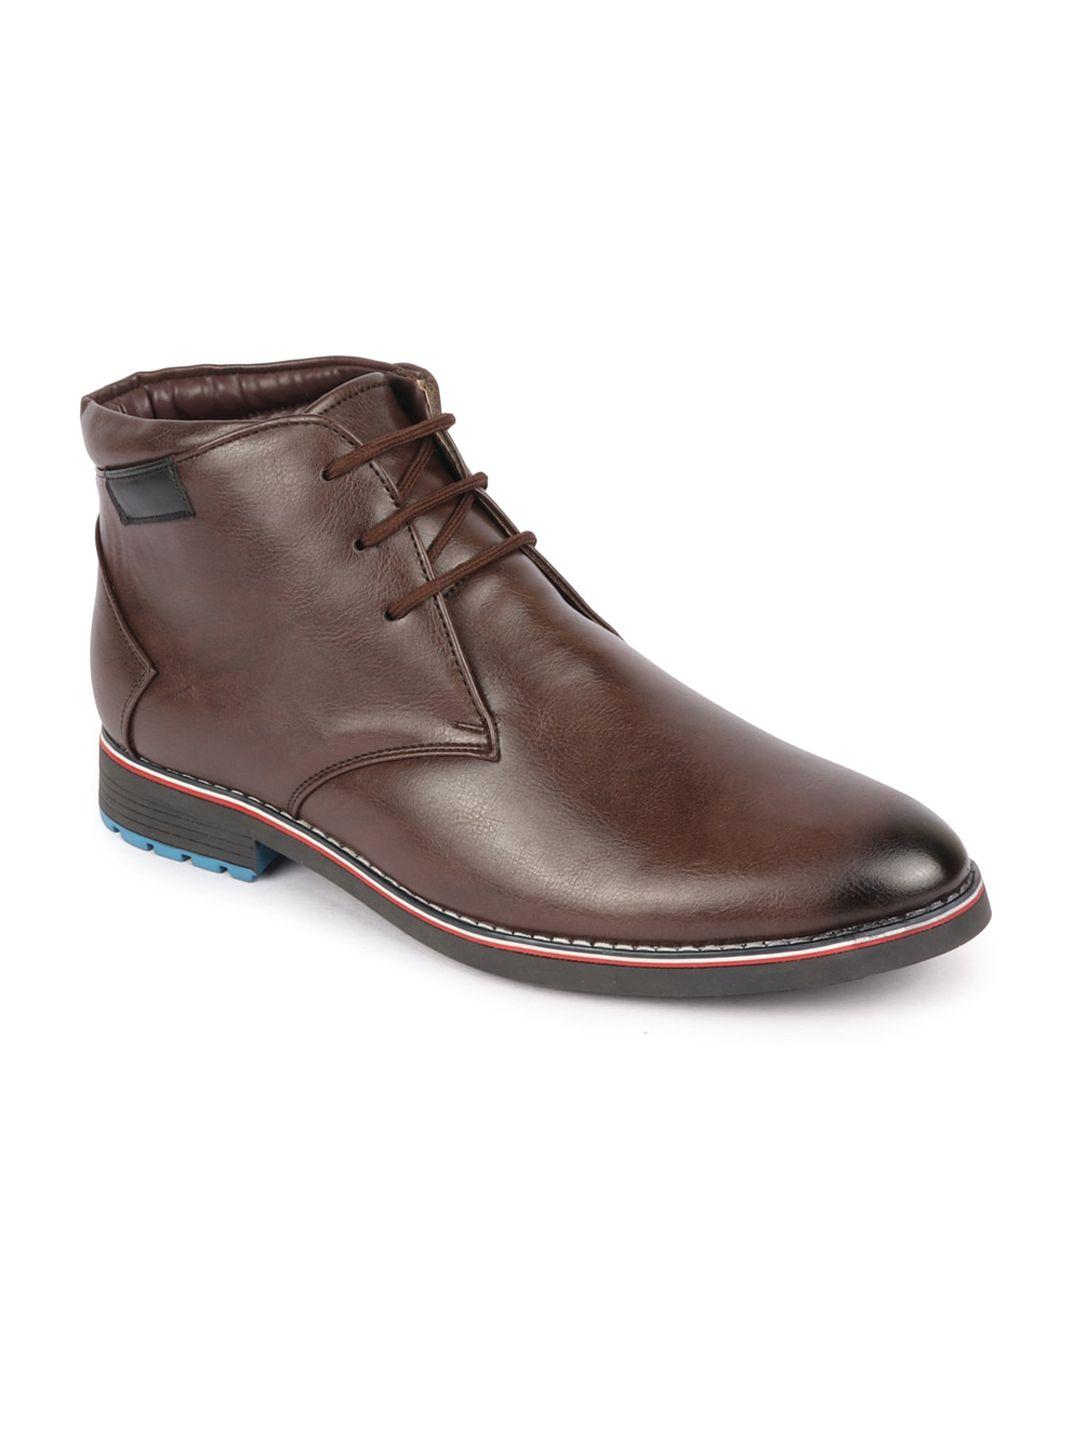 fausto men textured leather mid-top desert boots